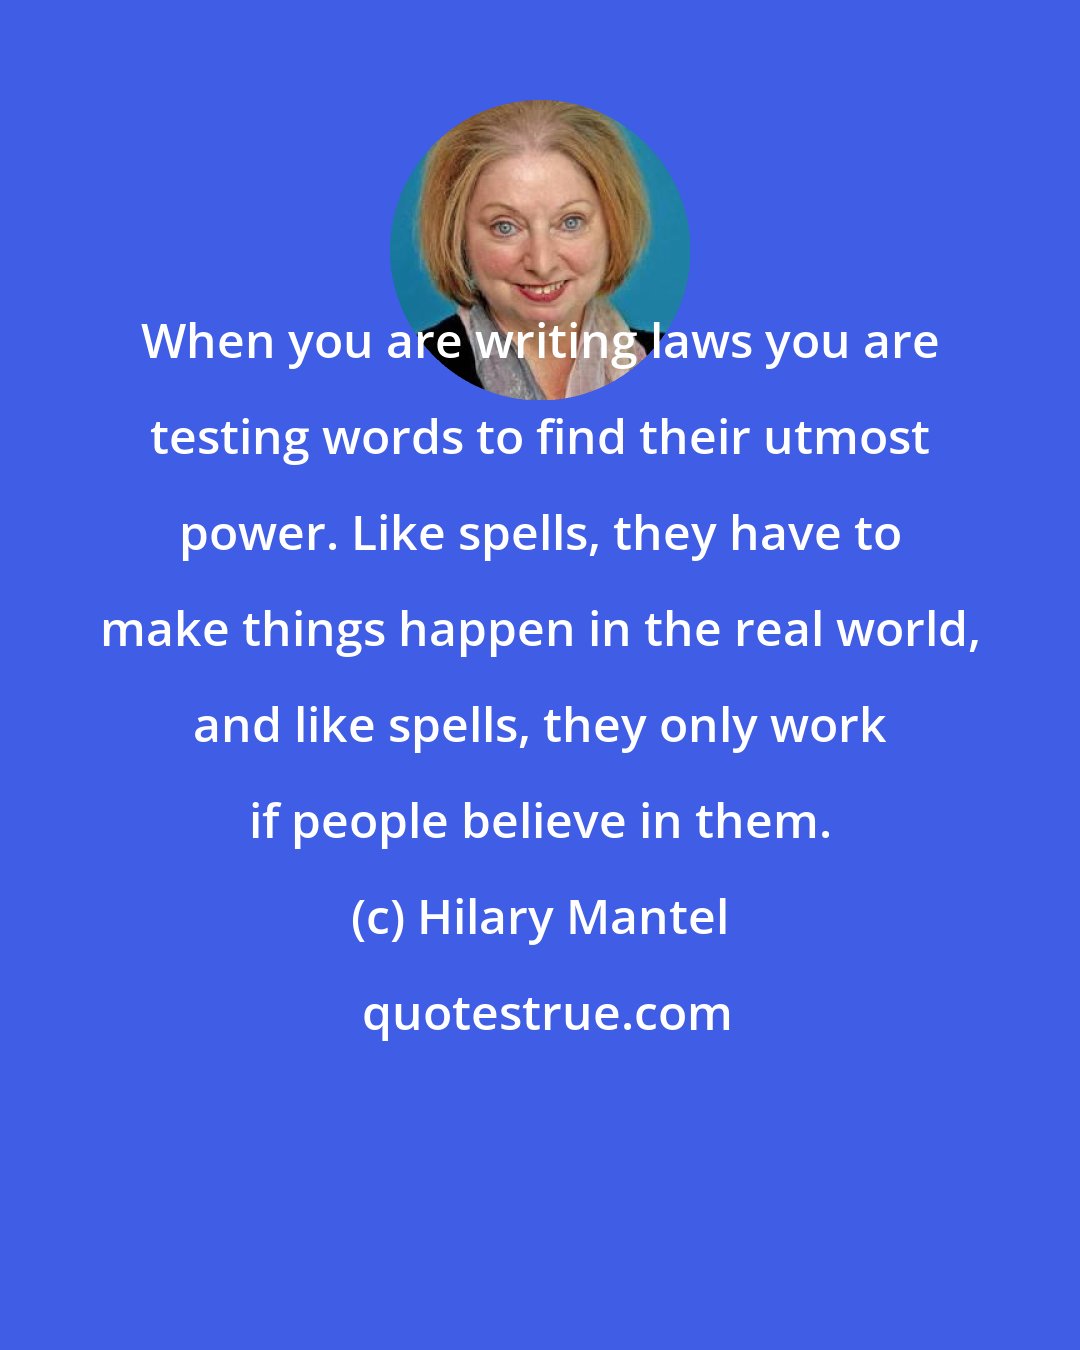 Hilary Mantel: When you are writing laws you are testing words to find their utmost power. Like spells, they have to make things happen in the real world, and like spells, they only work if people believe in them.